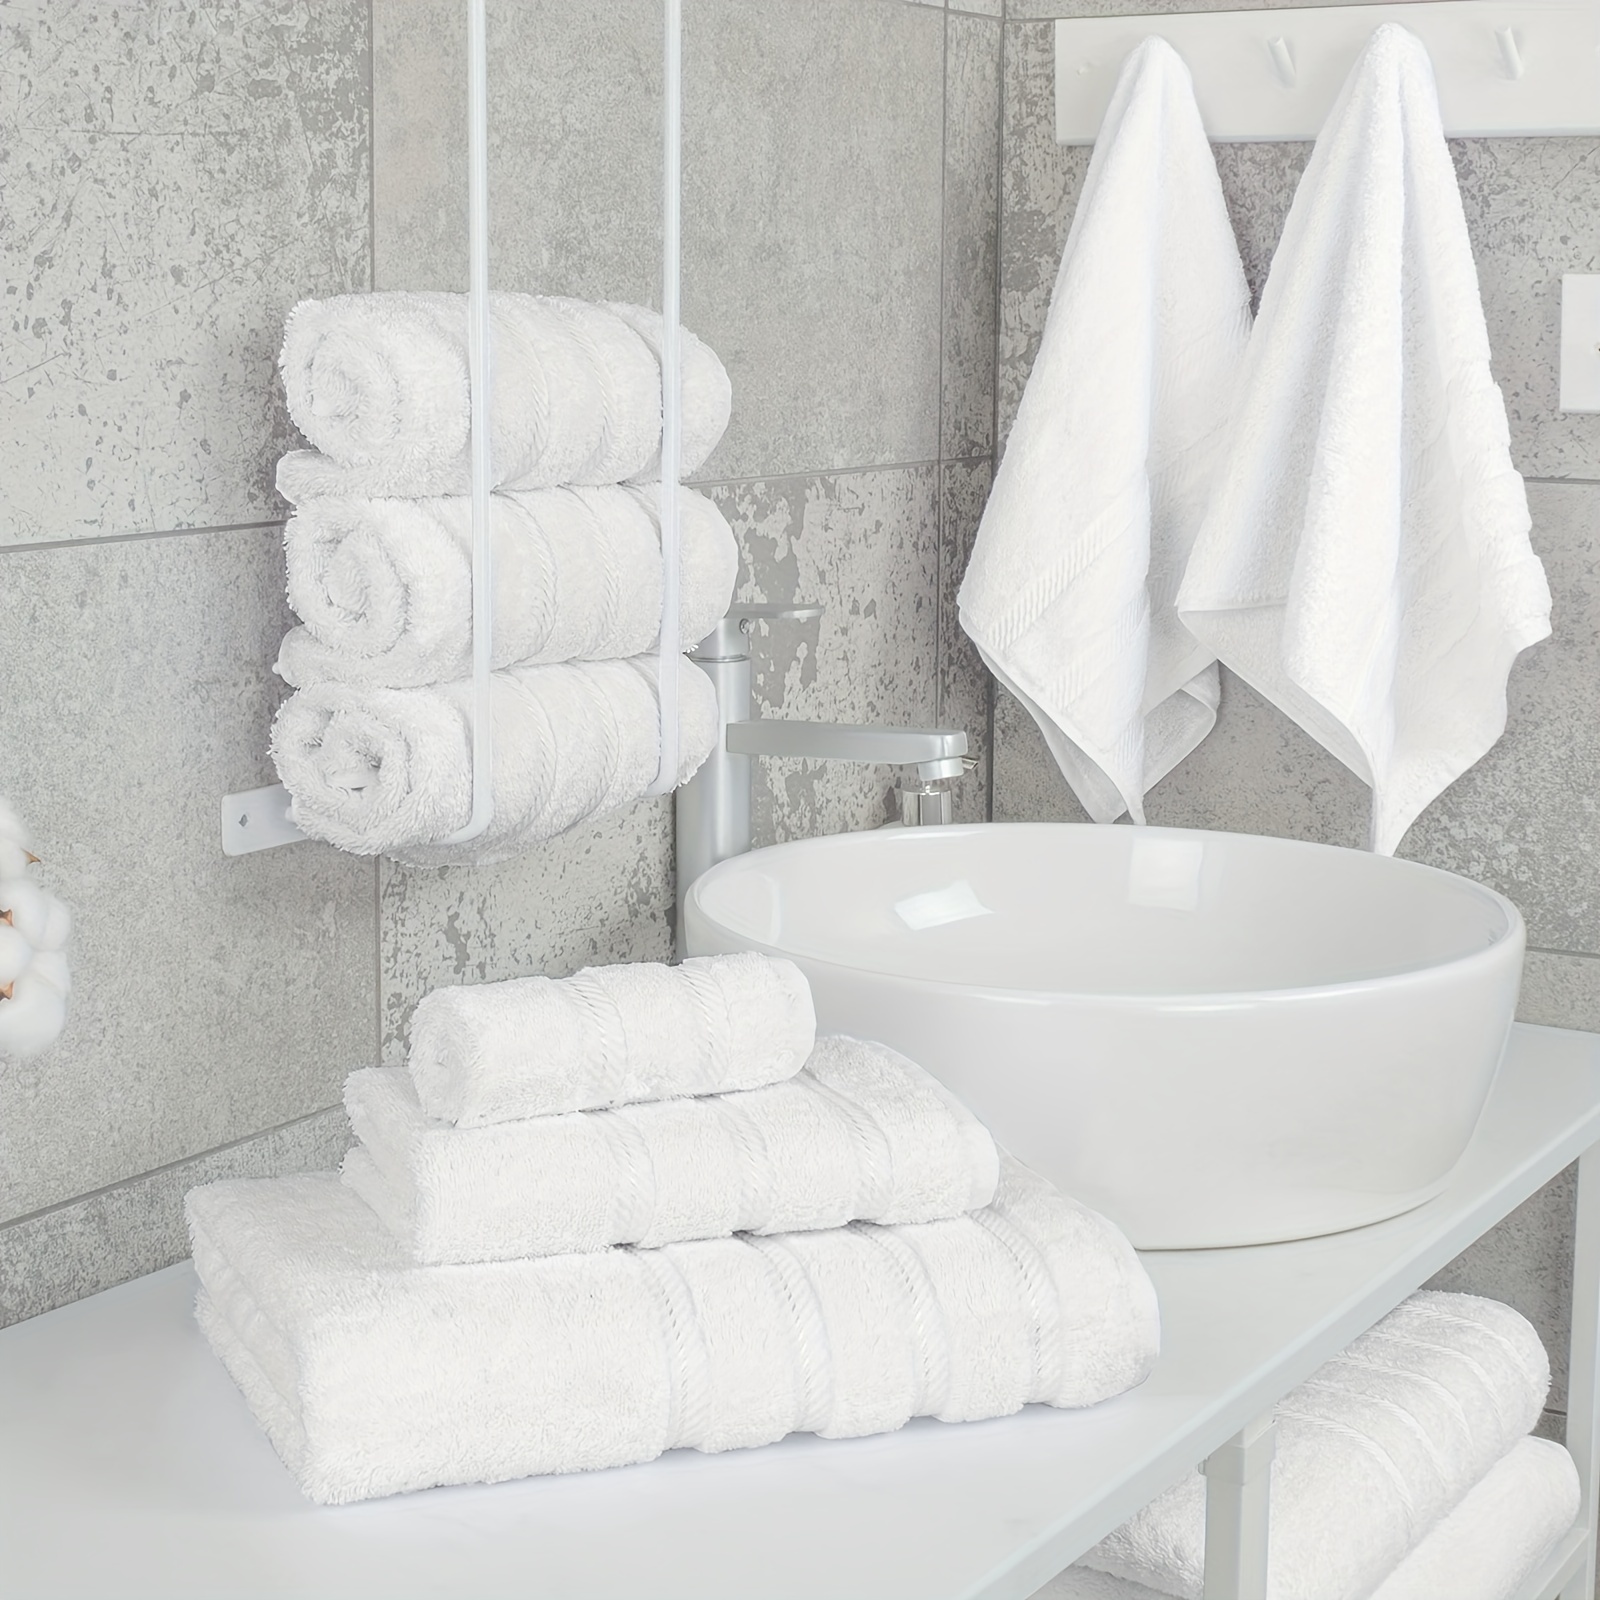 Clearance! Hand Towels for Bathroom , Cotton Bath Hand Towel , Face Towel  Soft Highly Absorbent Towels for Adults and Children for Bathroom Kitchen